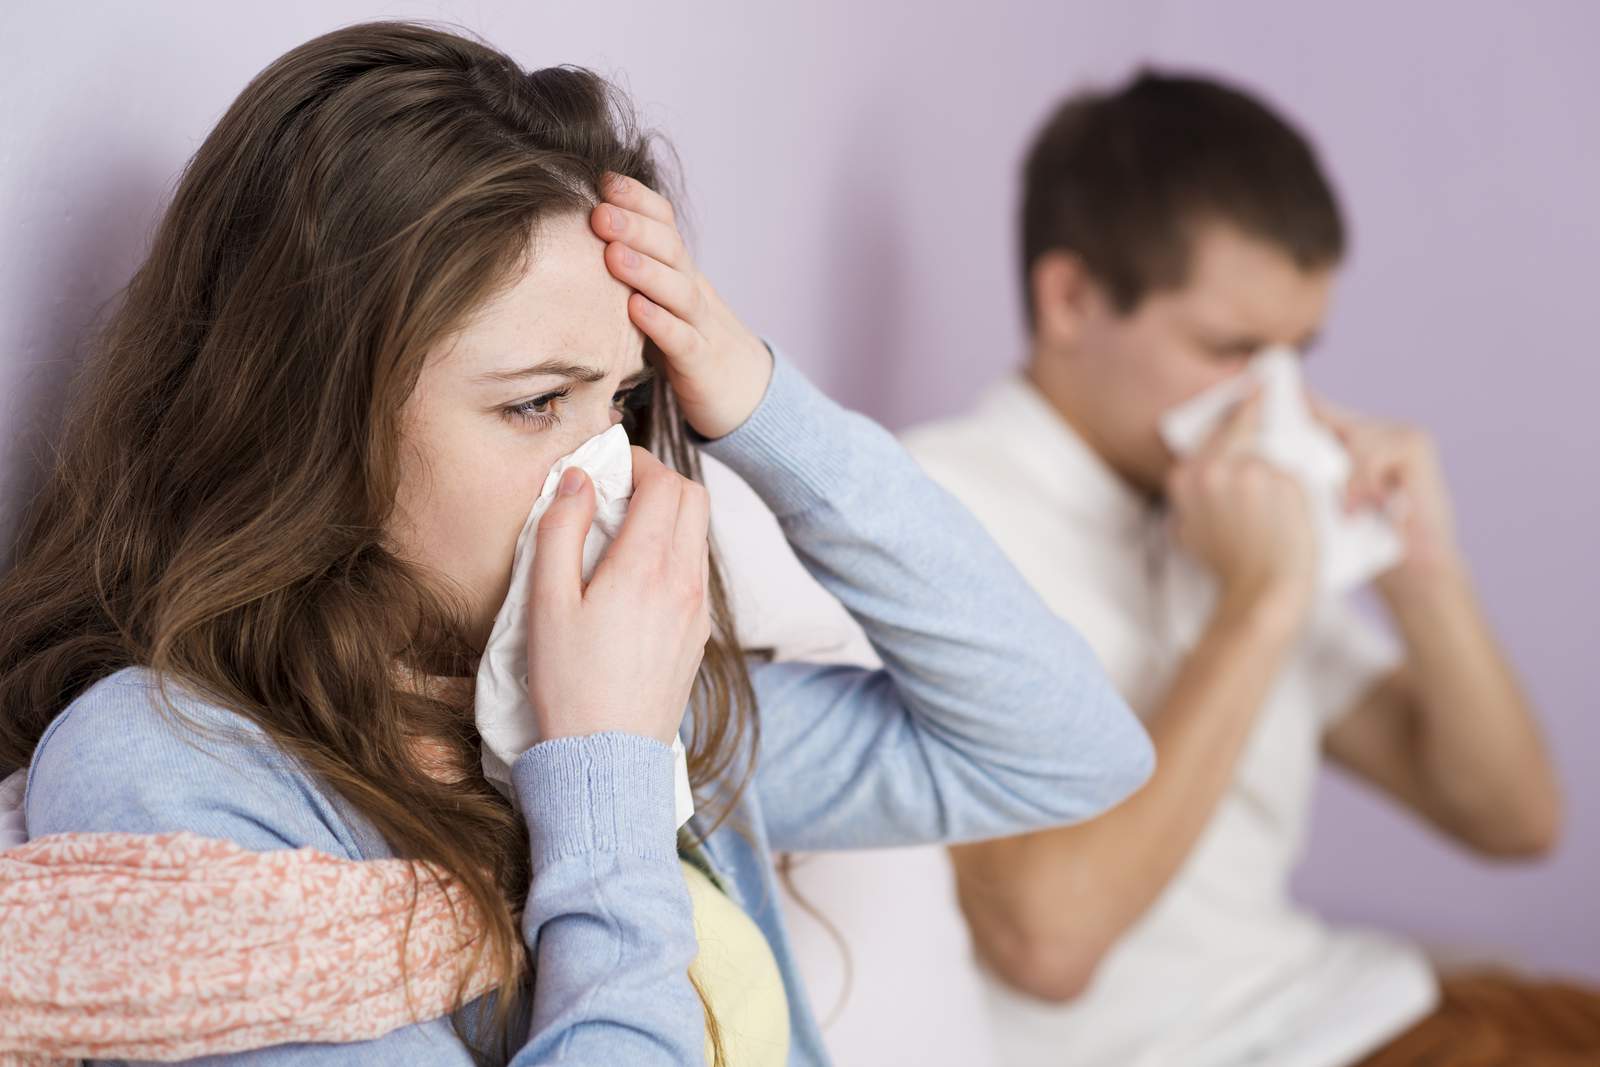 Do I have the flu or COVID-19? Here’s how to tell